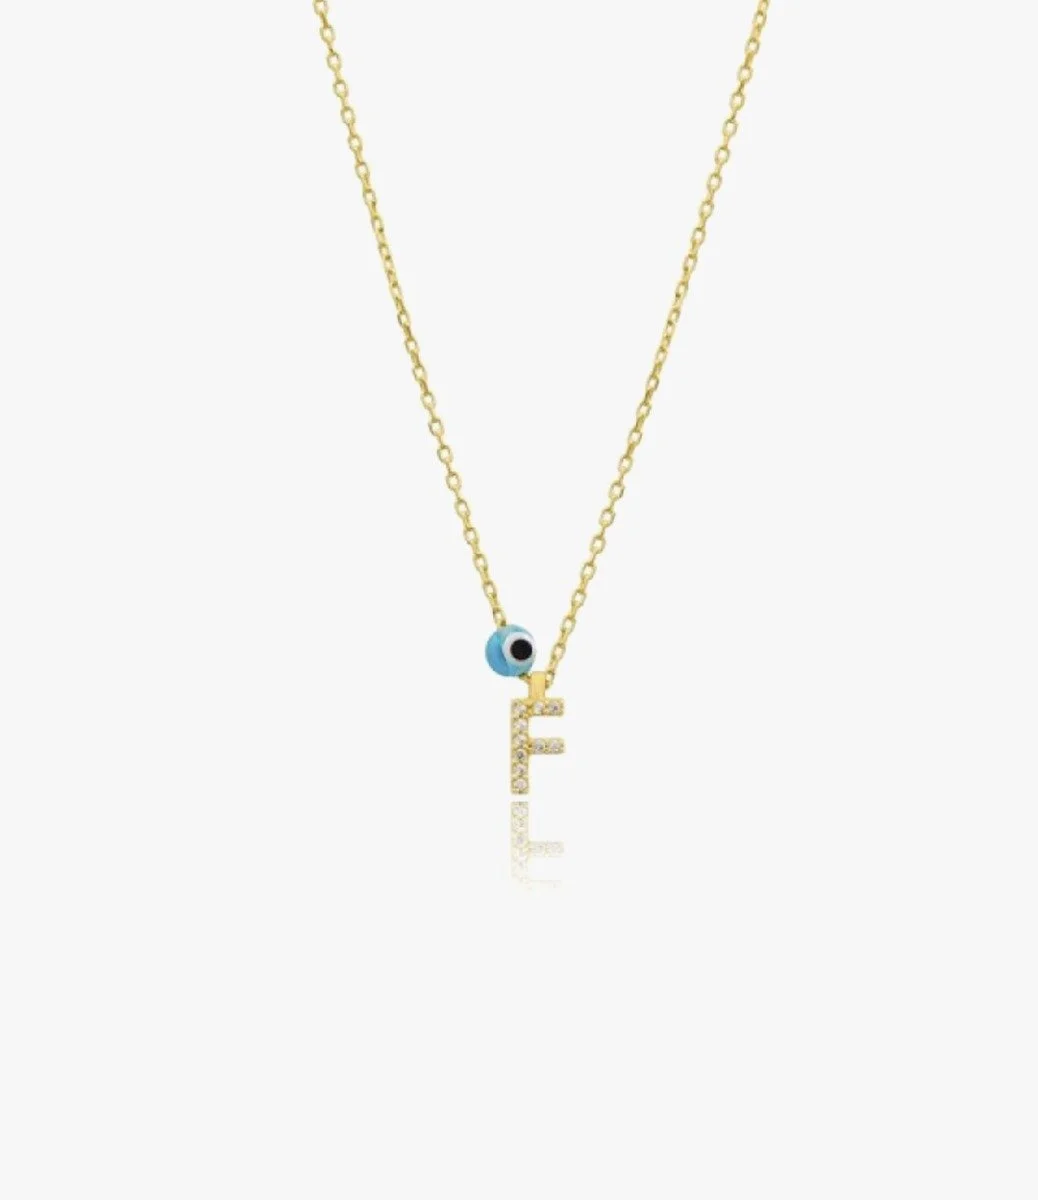 Gold Necklace Decorated With Letter F and Blue Bead